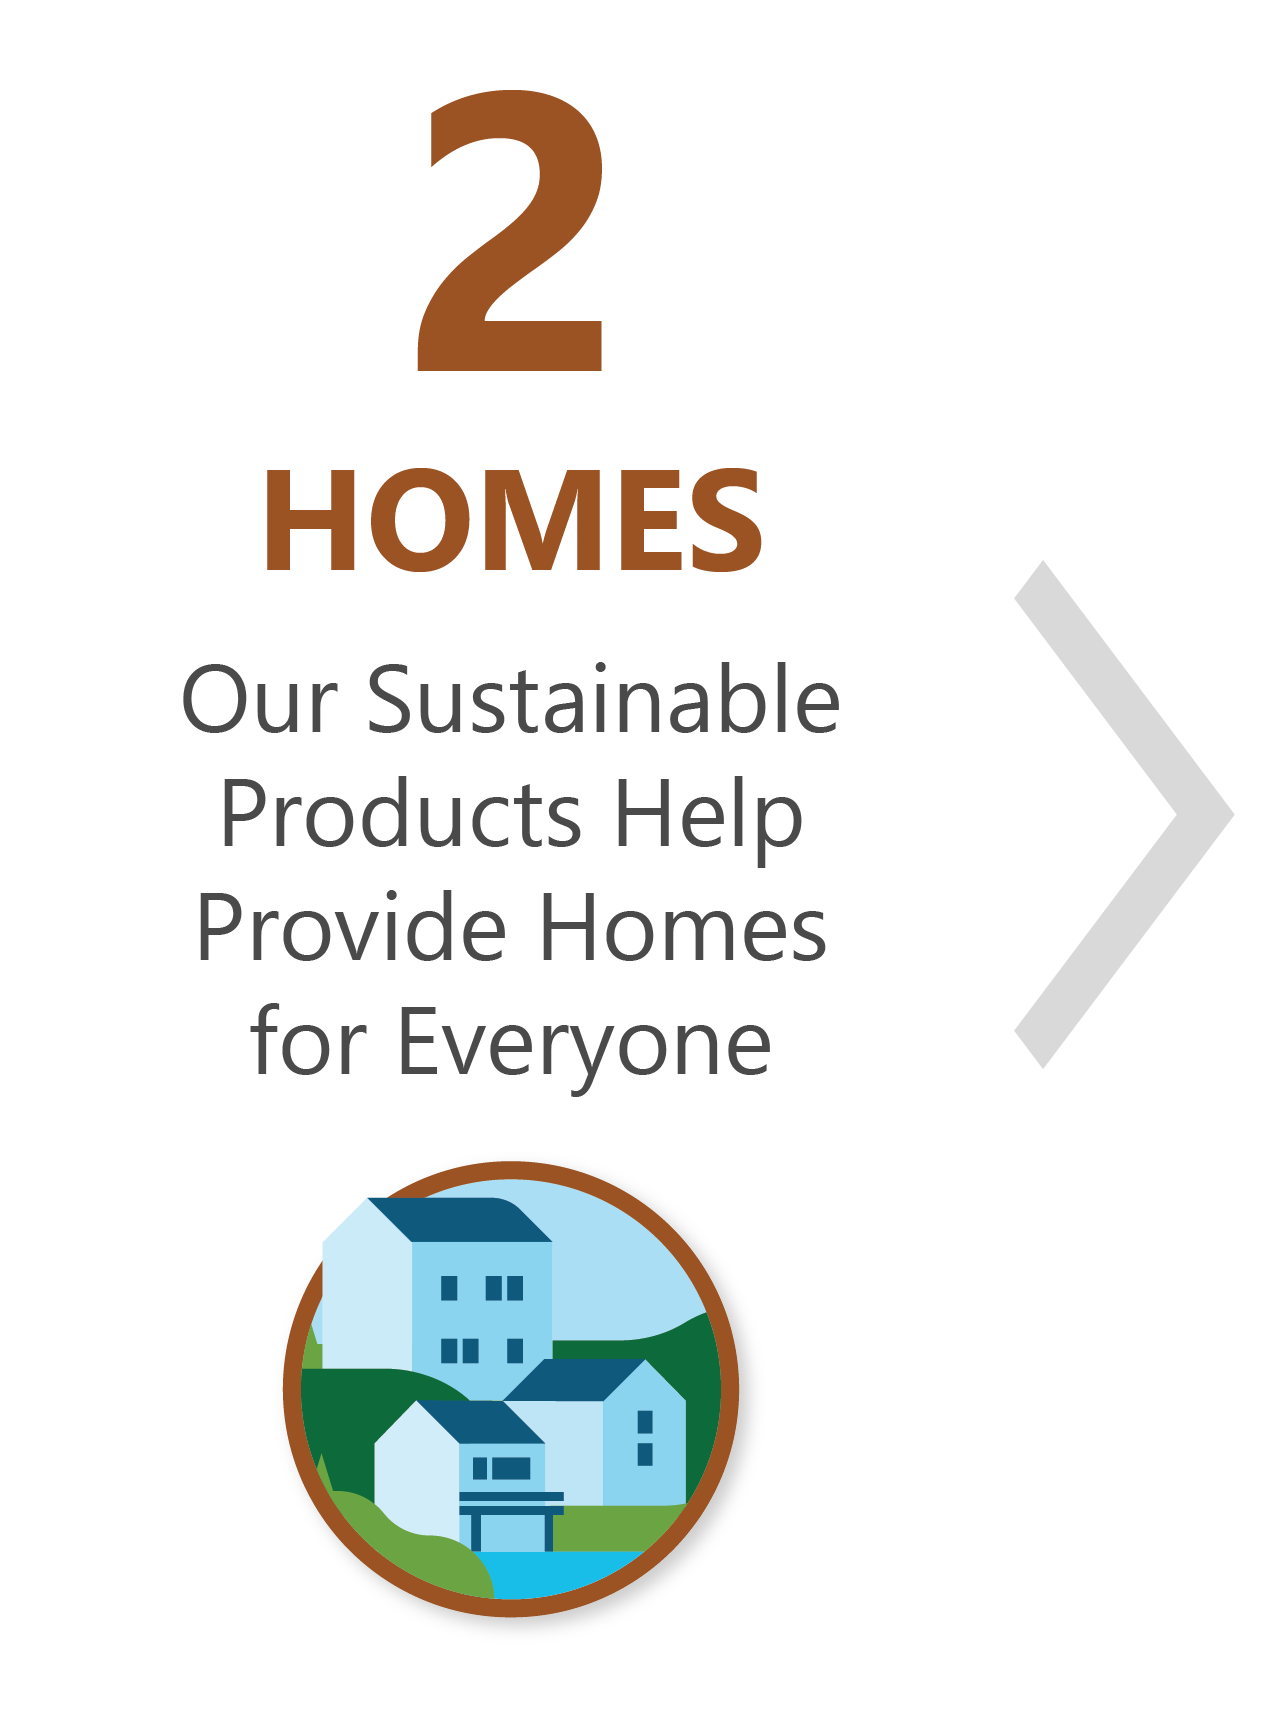 Icon and graphic for Our Sustainable Products Help Provide Homes for Everyone, showing a graphic of homes.